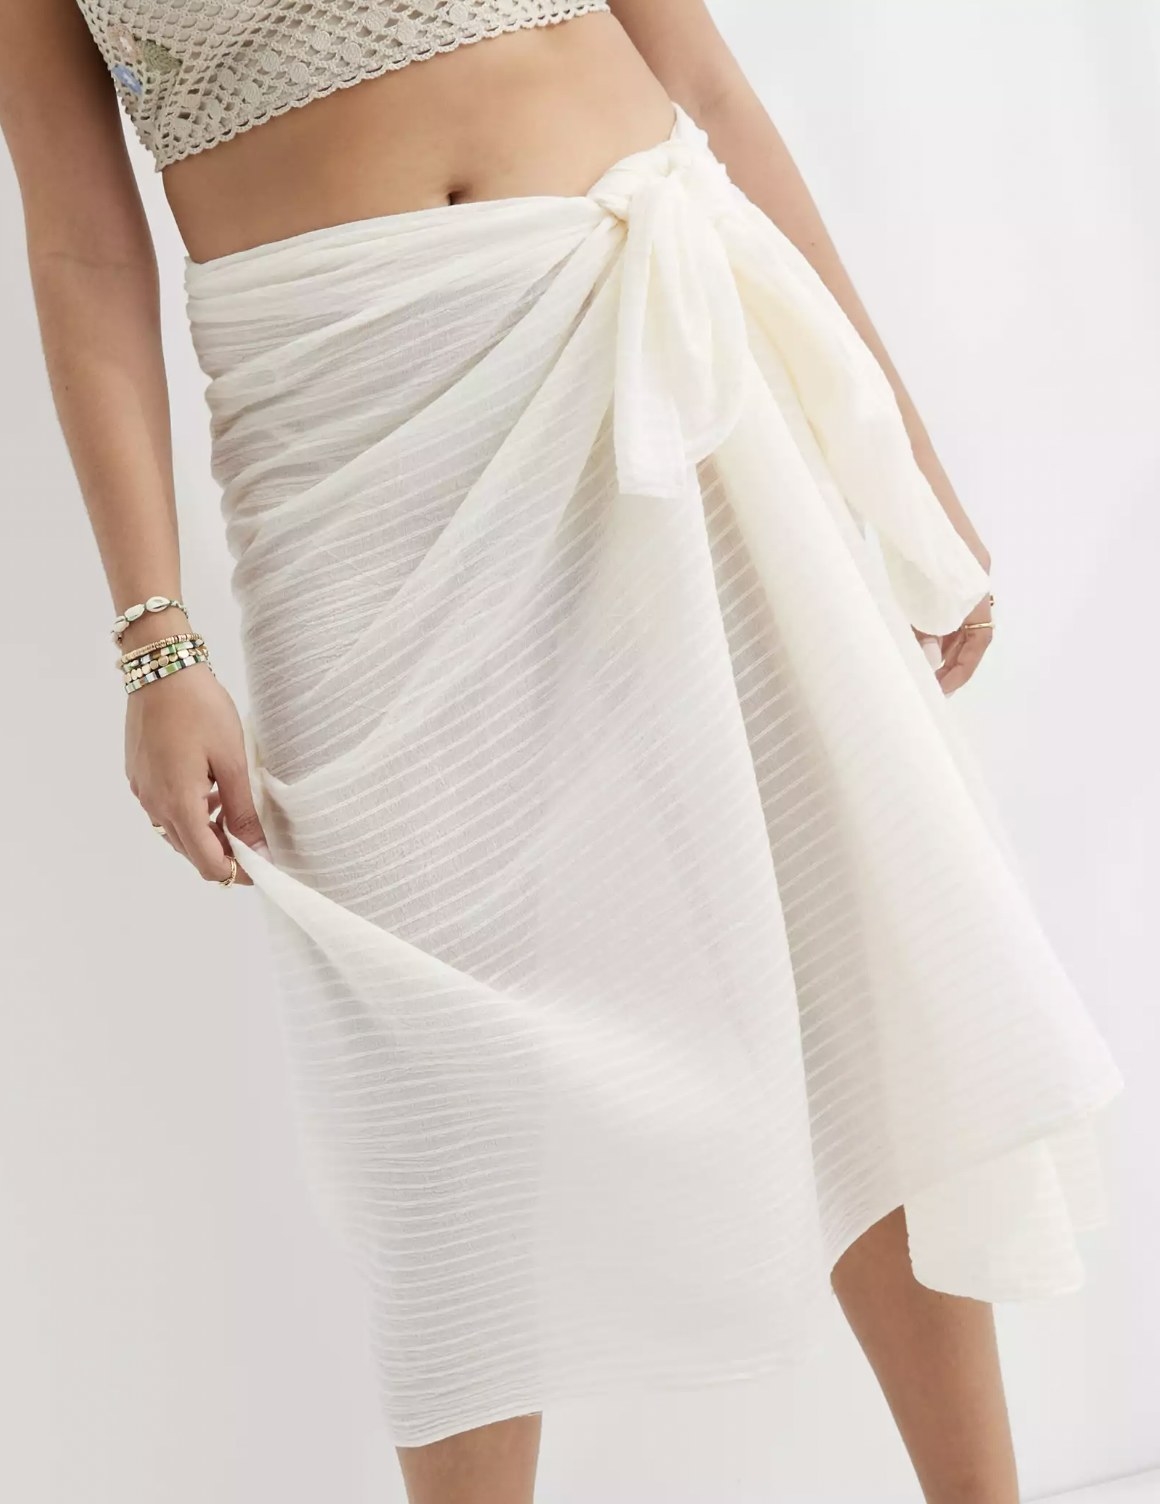 Model wearing the white striped muslin sarong tied at waist